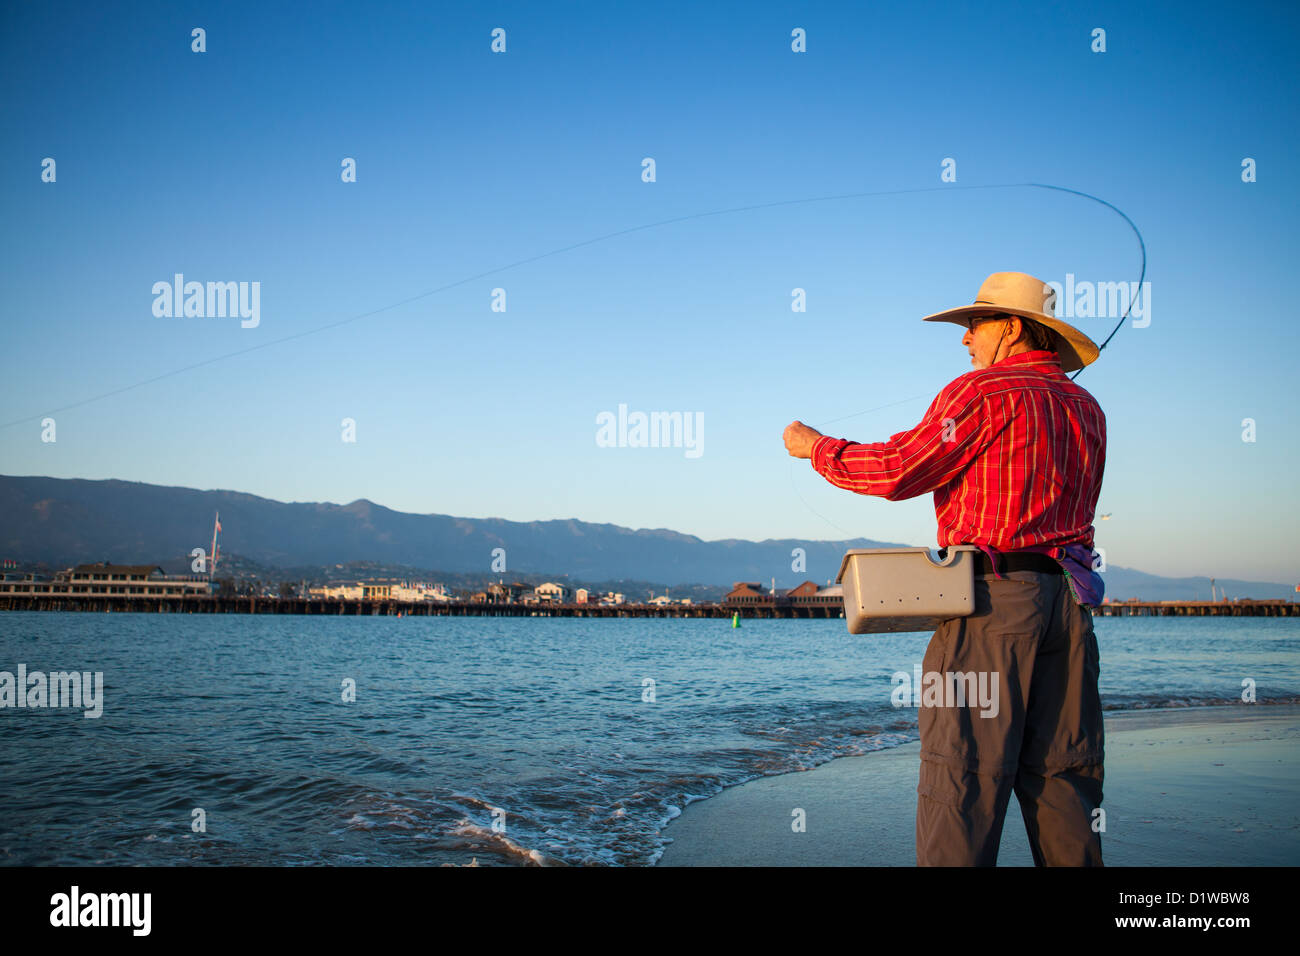 Saltwater flyfisherman casting for surf perch with the wharf in the background, harbor sandbar, Santa Barbara, California Stock Photo